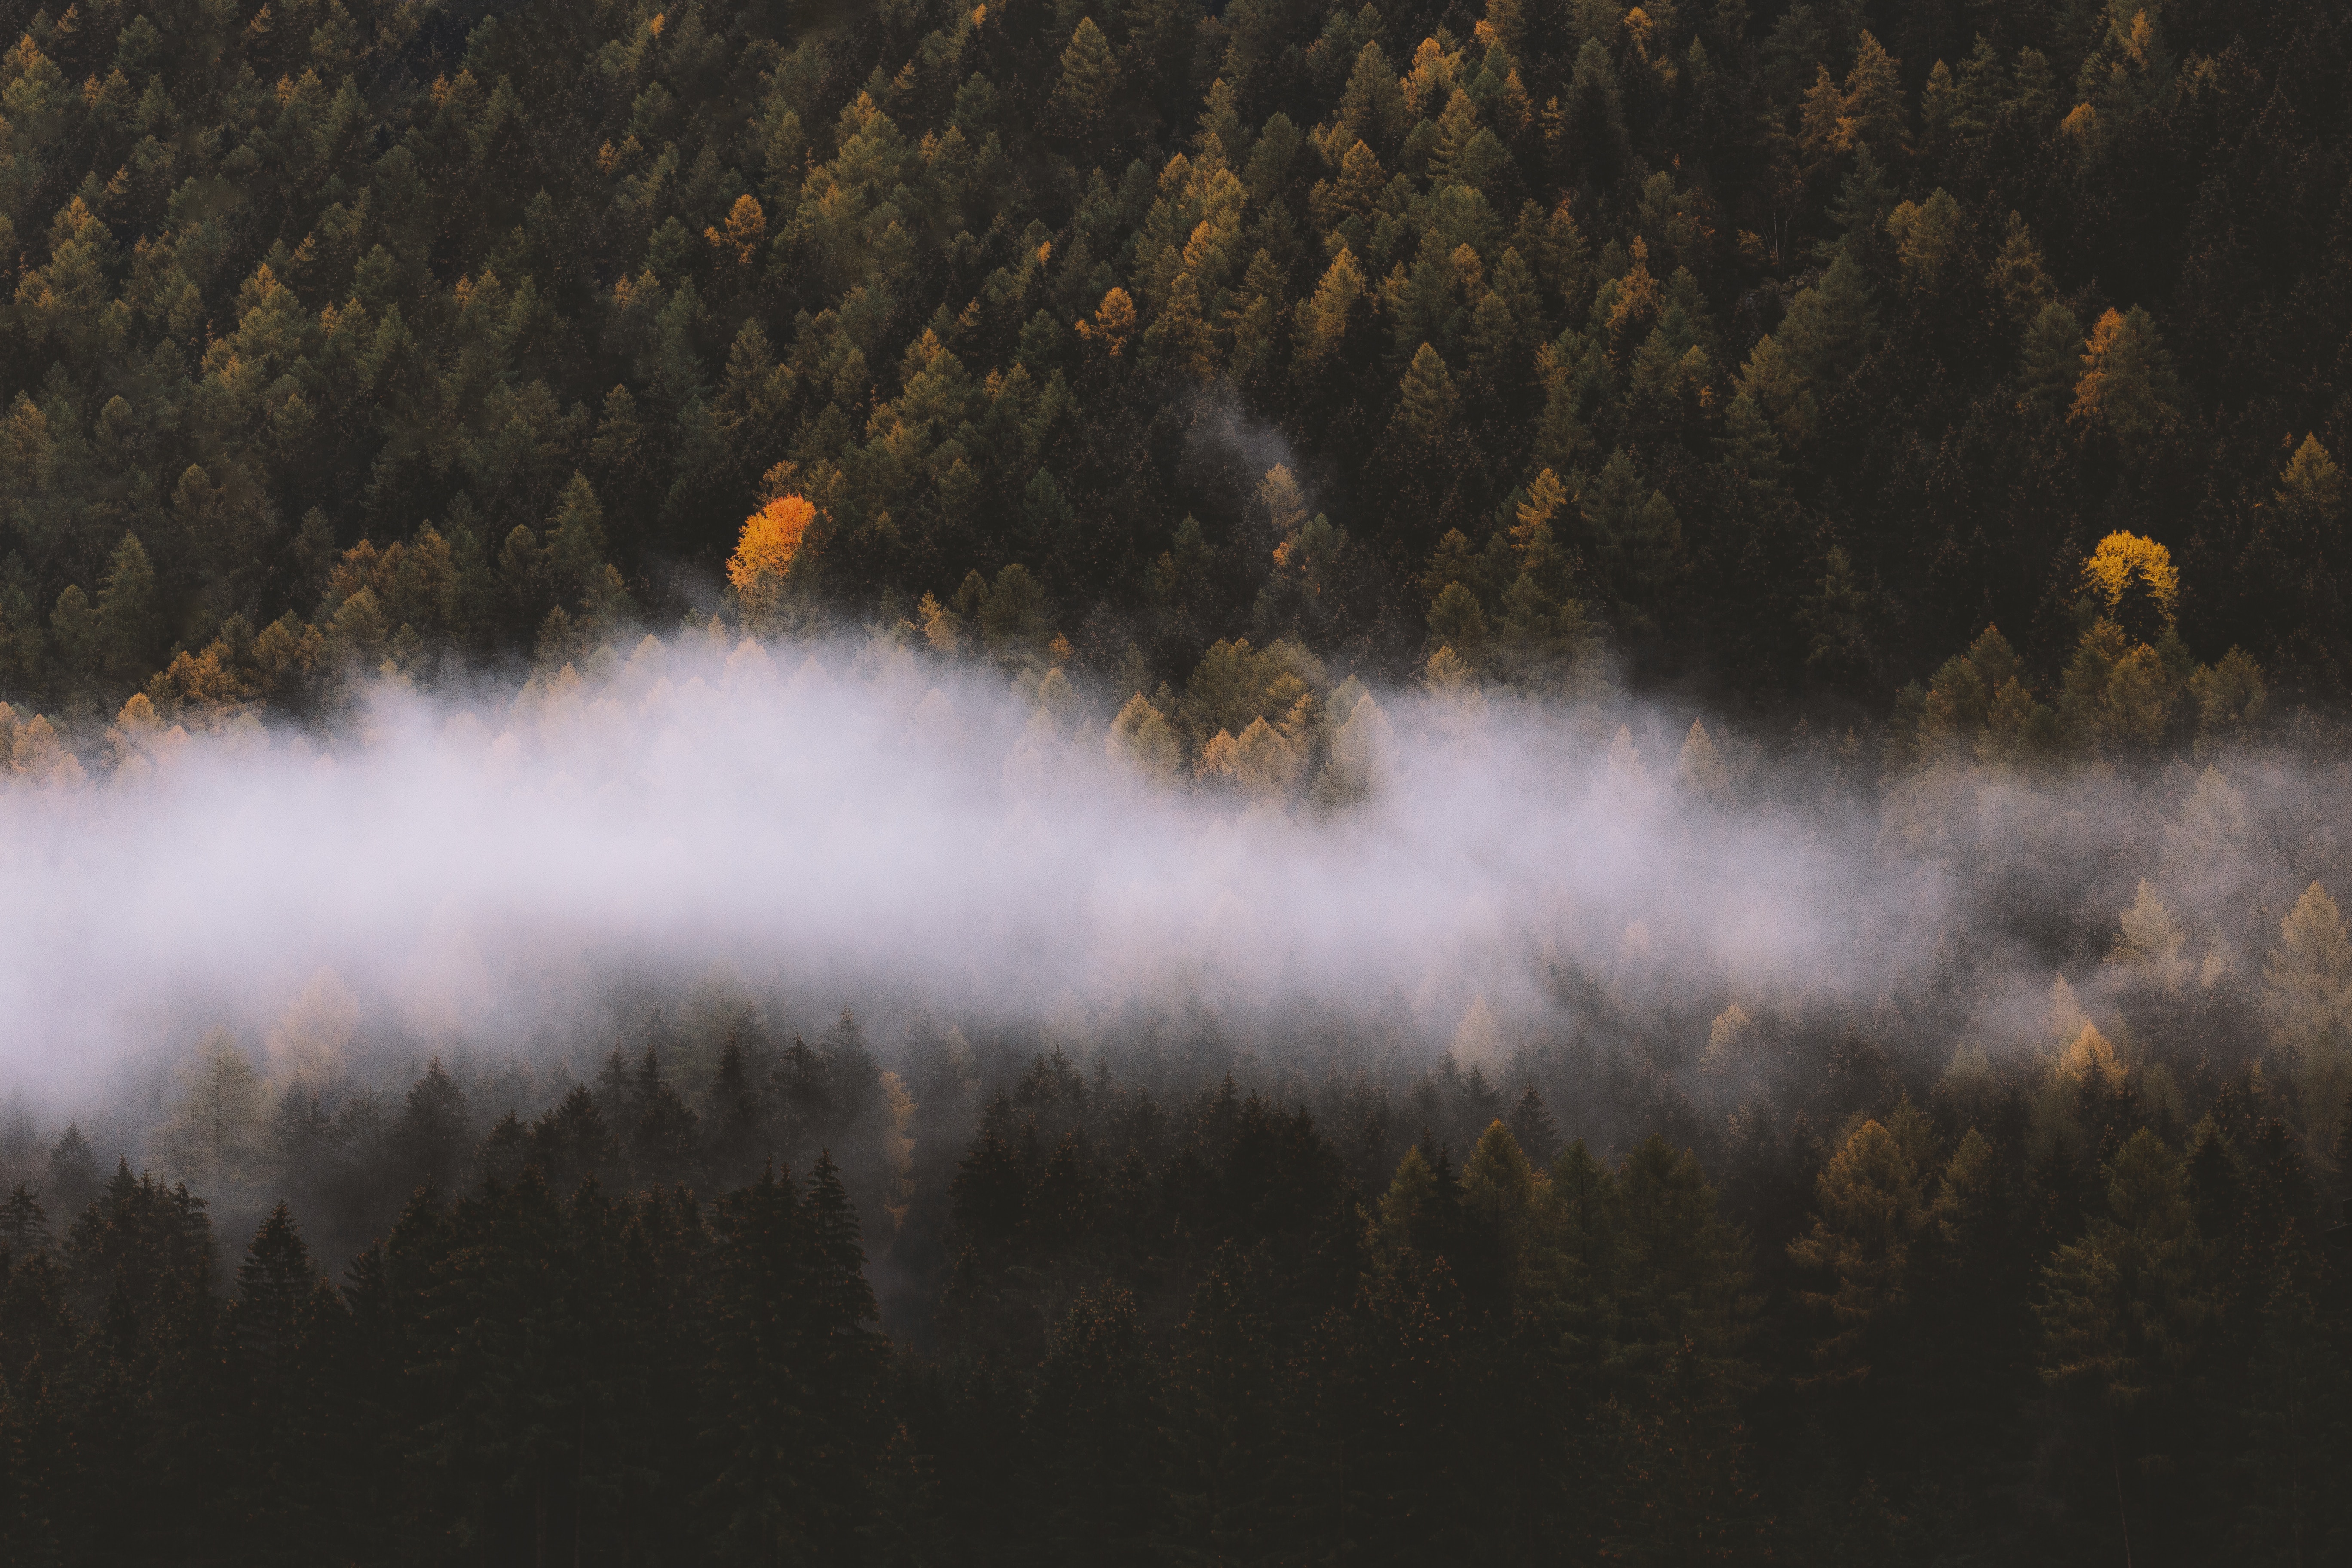 5472x3648 autumn, foggy, wallpaper, explore more, nature landscape, Creative Commons image, drone view, mist, mist haze, fog, fall, explore, nature, misty, from above, nature green